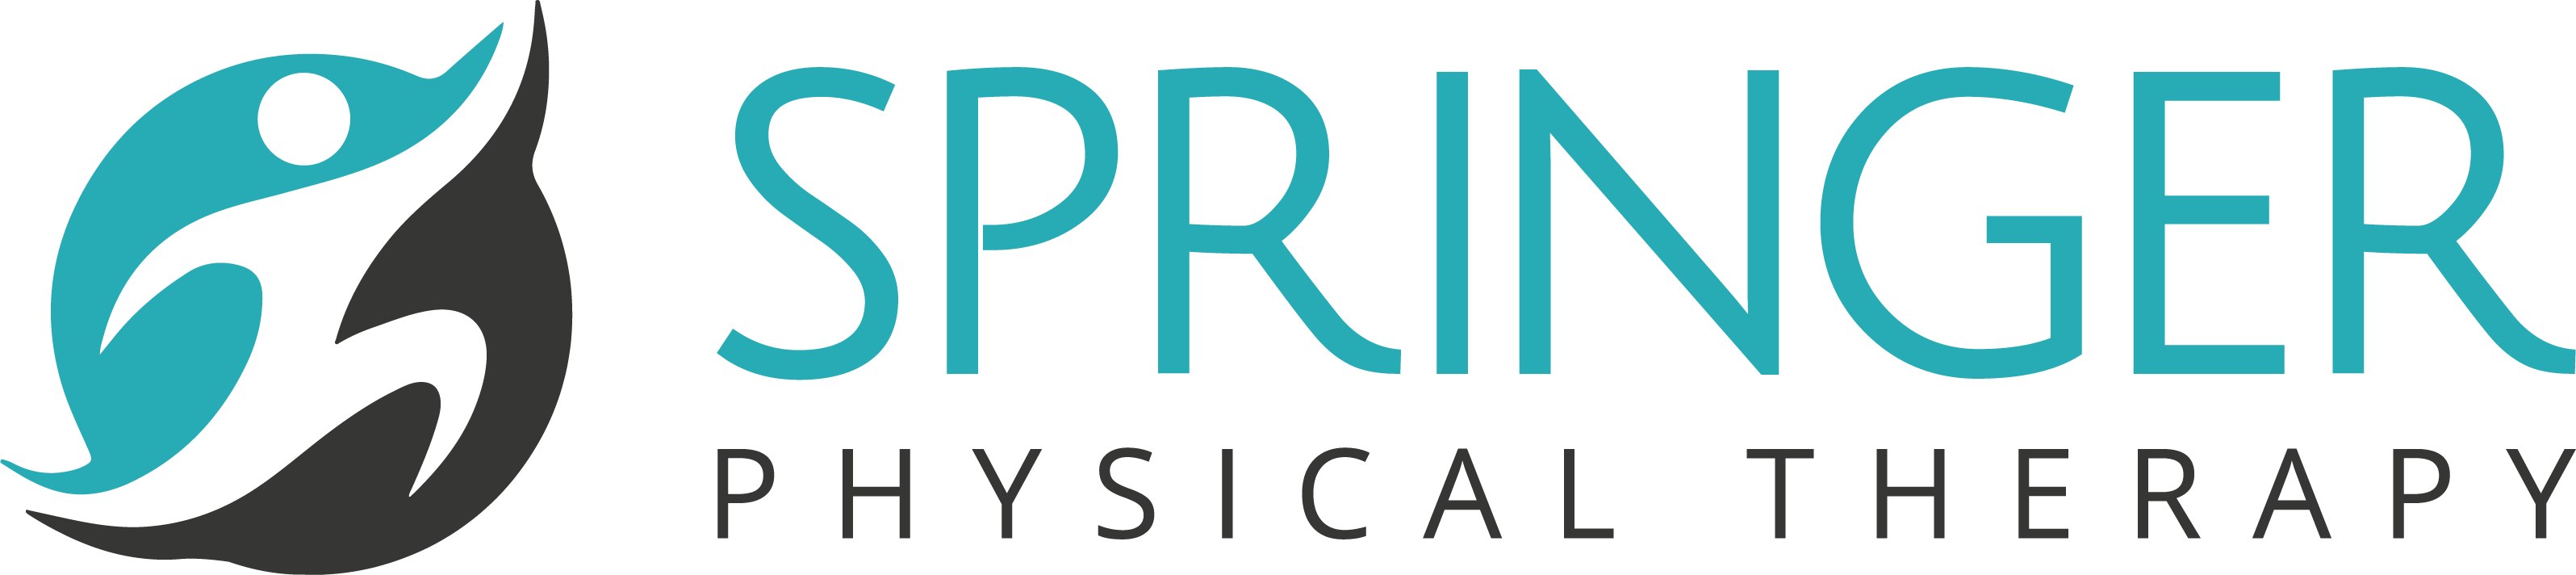 Springer Physical Therapy